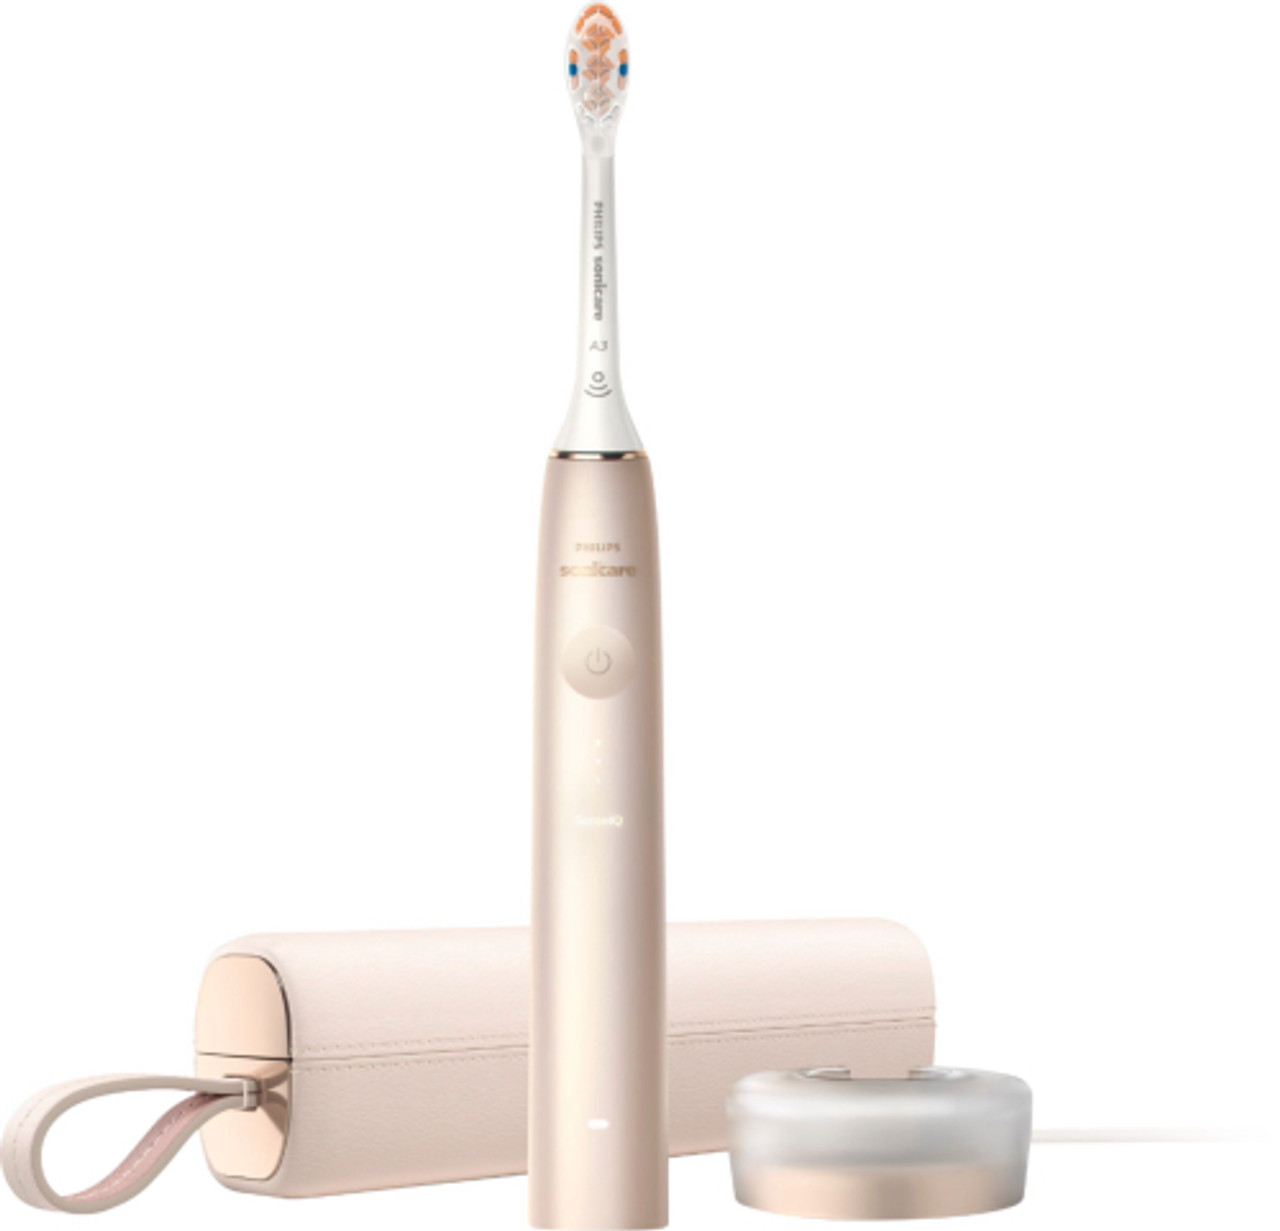 Philips Sonicare 9900 Prestige, Rechargeable Toothbrush with SenseIQ, Champagne, HX9990/11 - Champagne